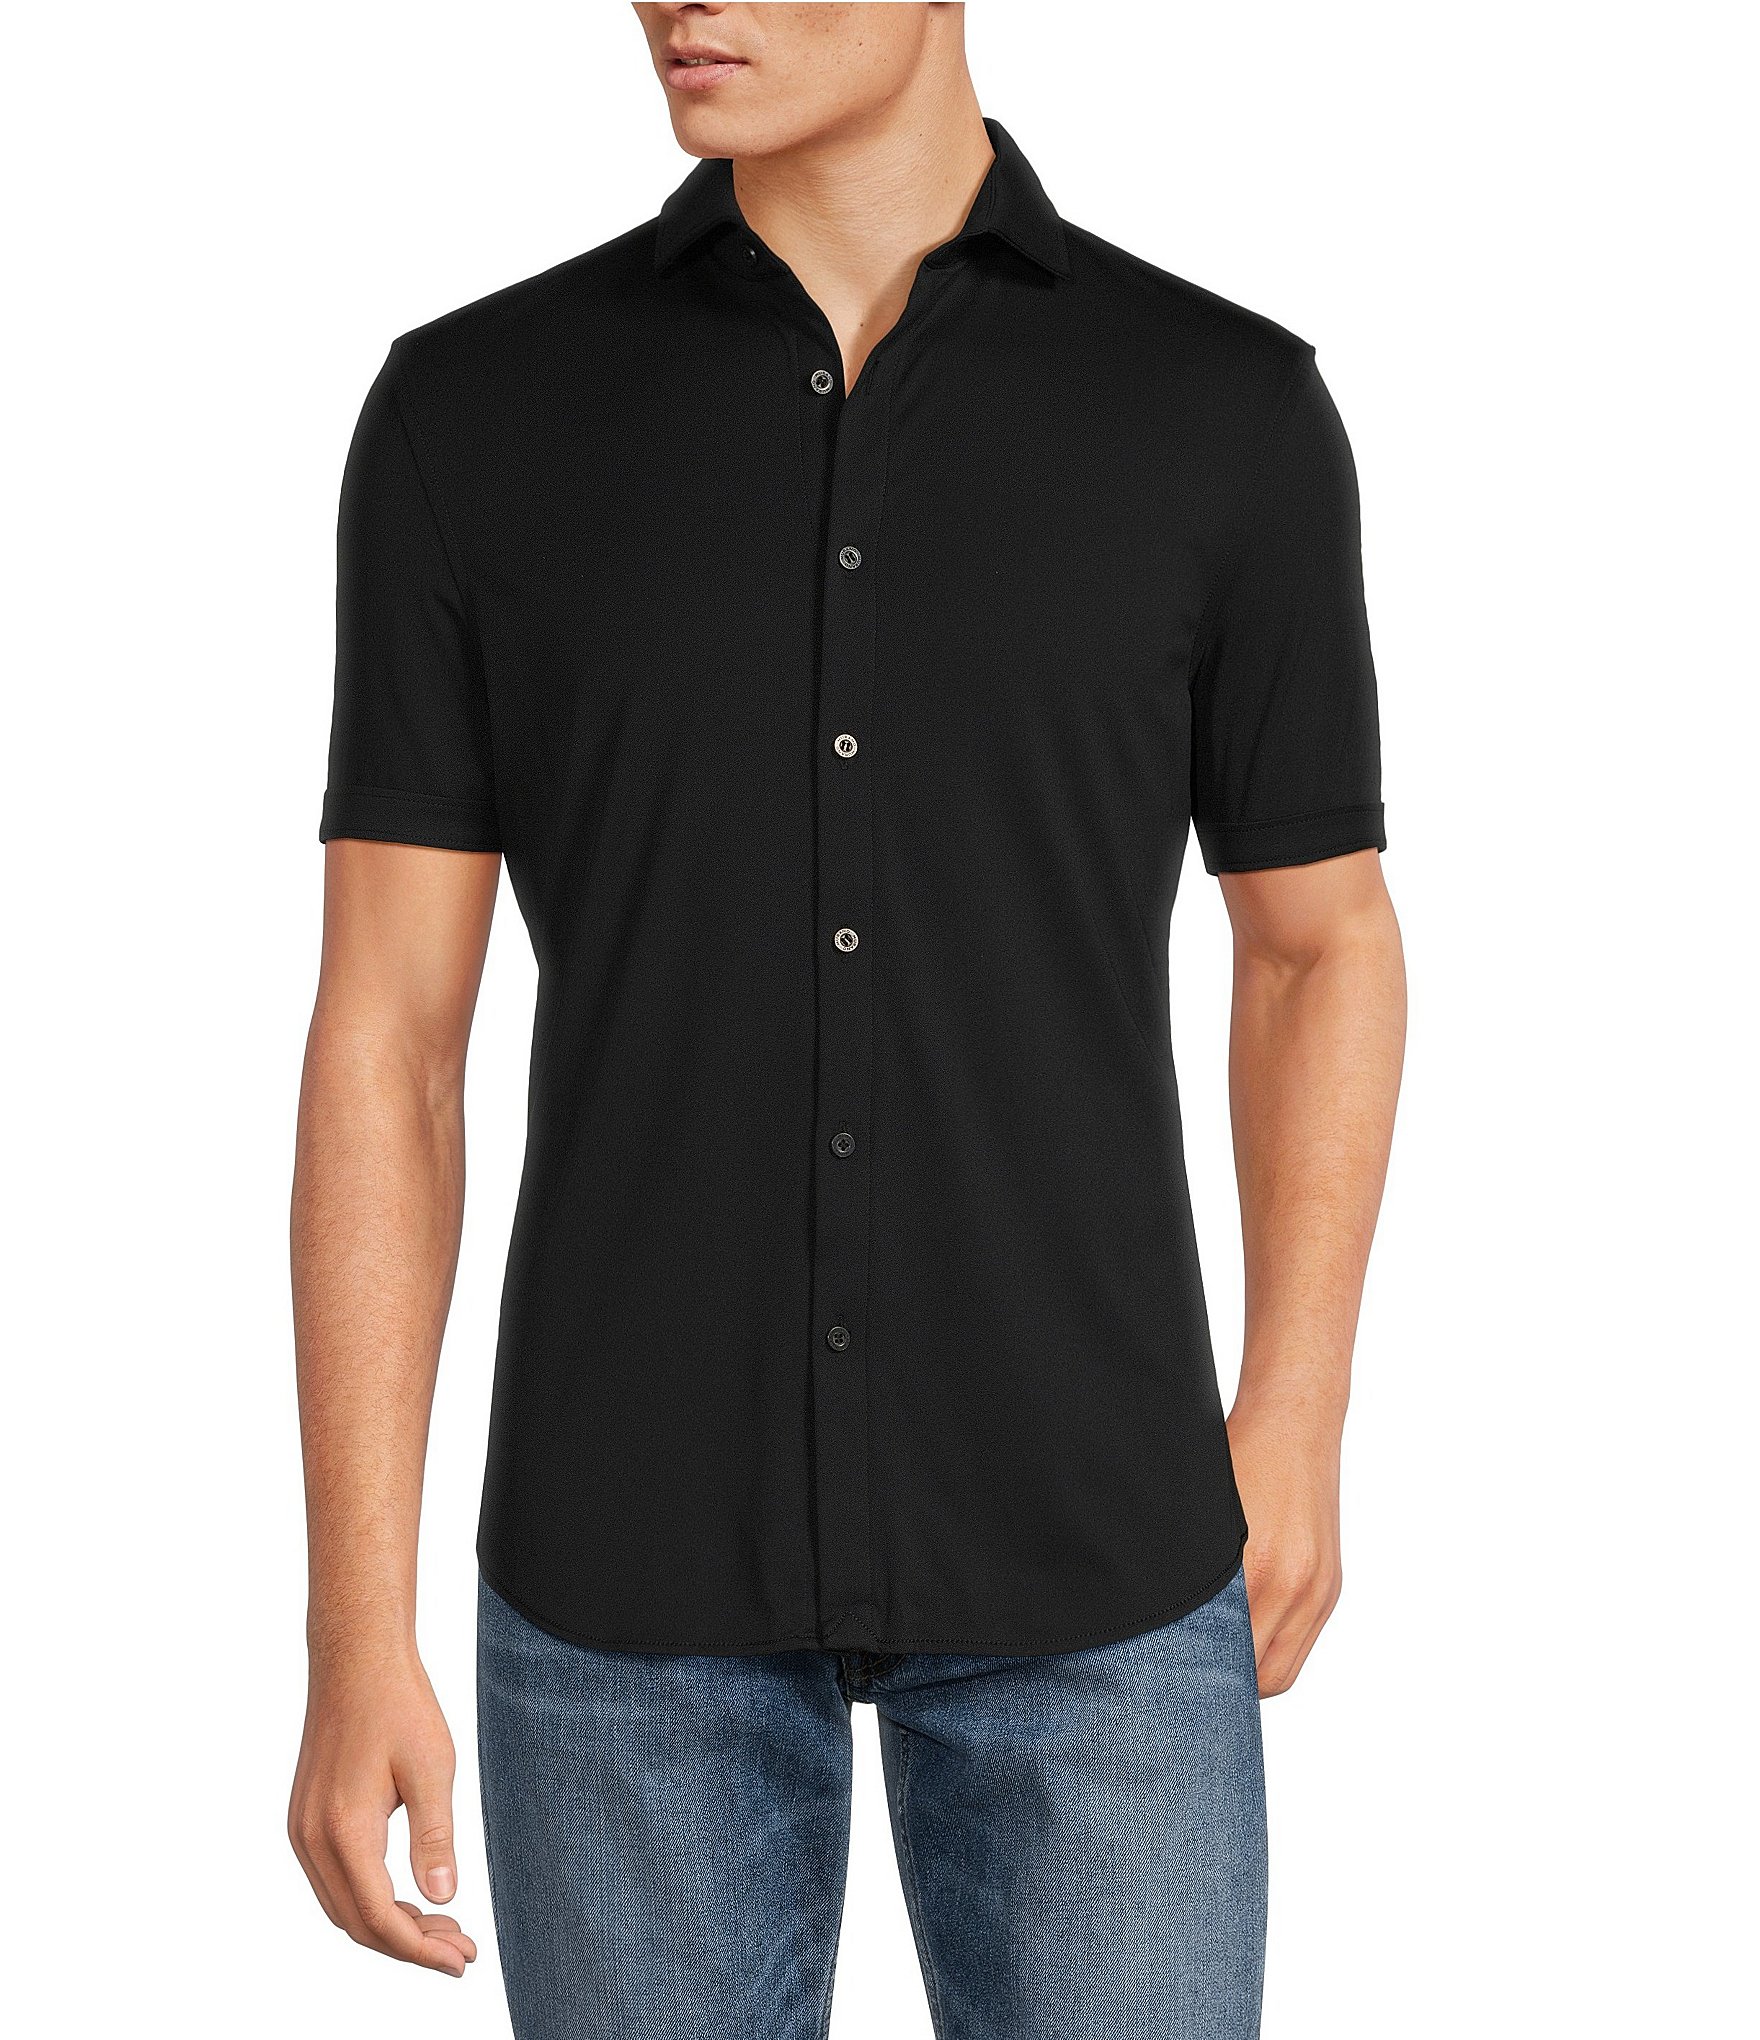 Murano Slim Fit Solid Performance Stretch Short Sleeve Knit Shirt ...